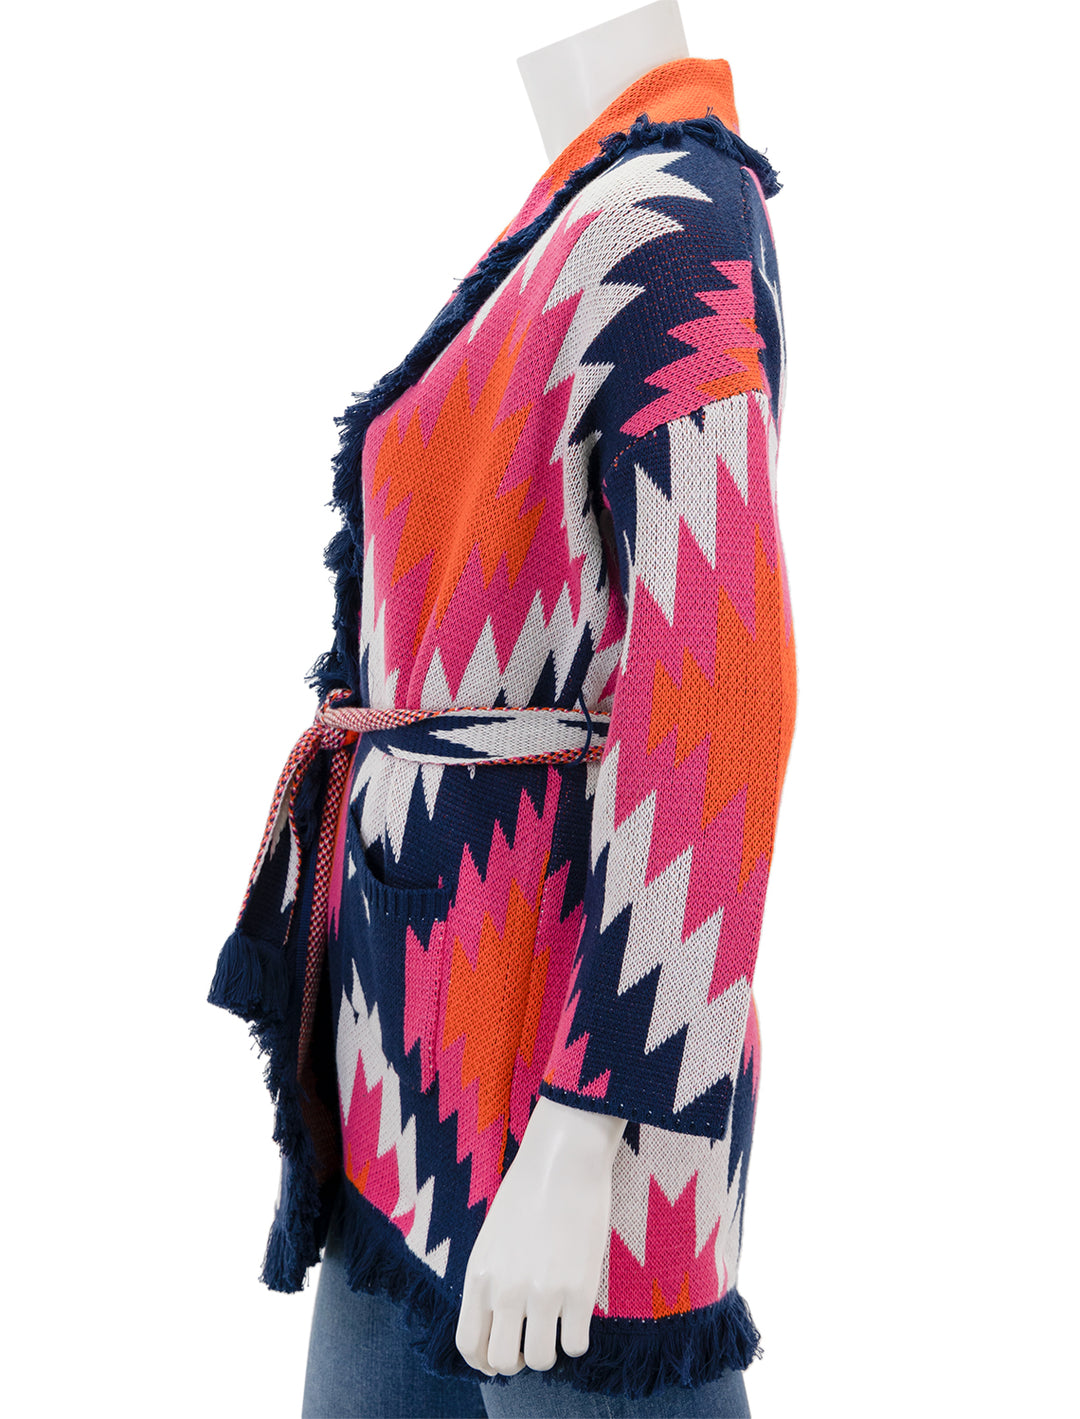 Side view of Vilagallo's Wrap Cardigan in Pink and Navy Multi.